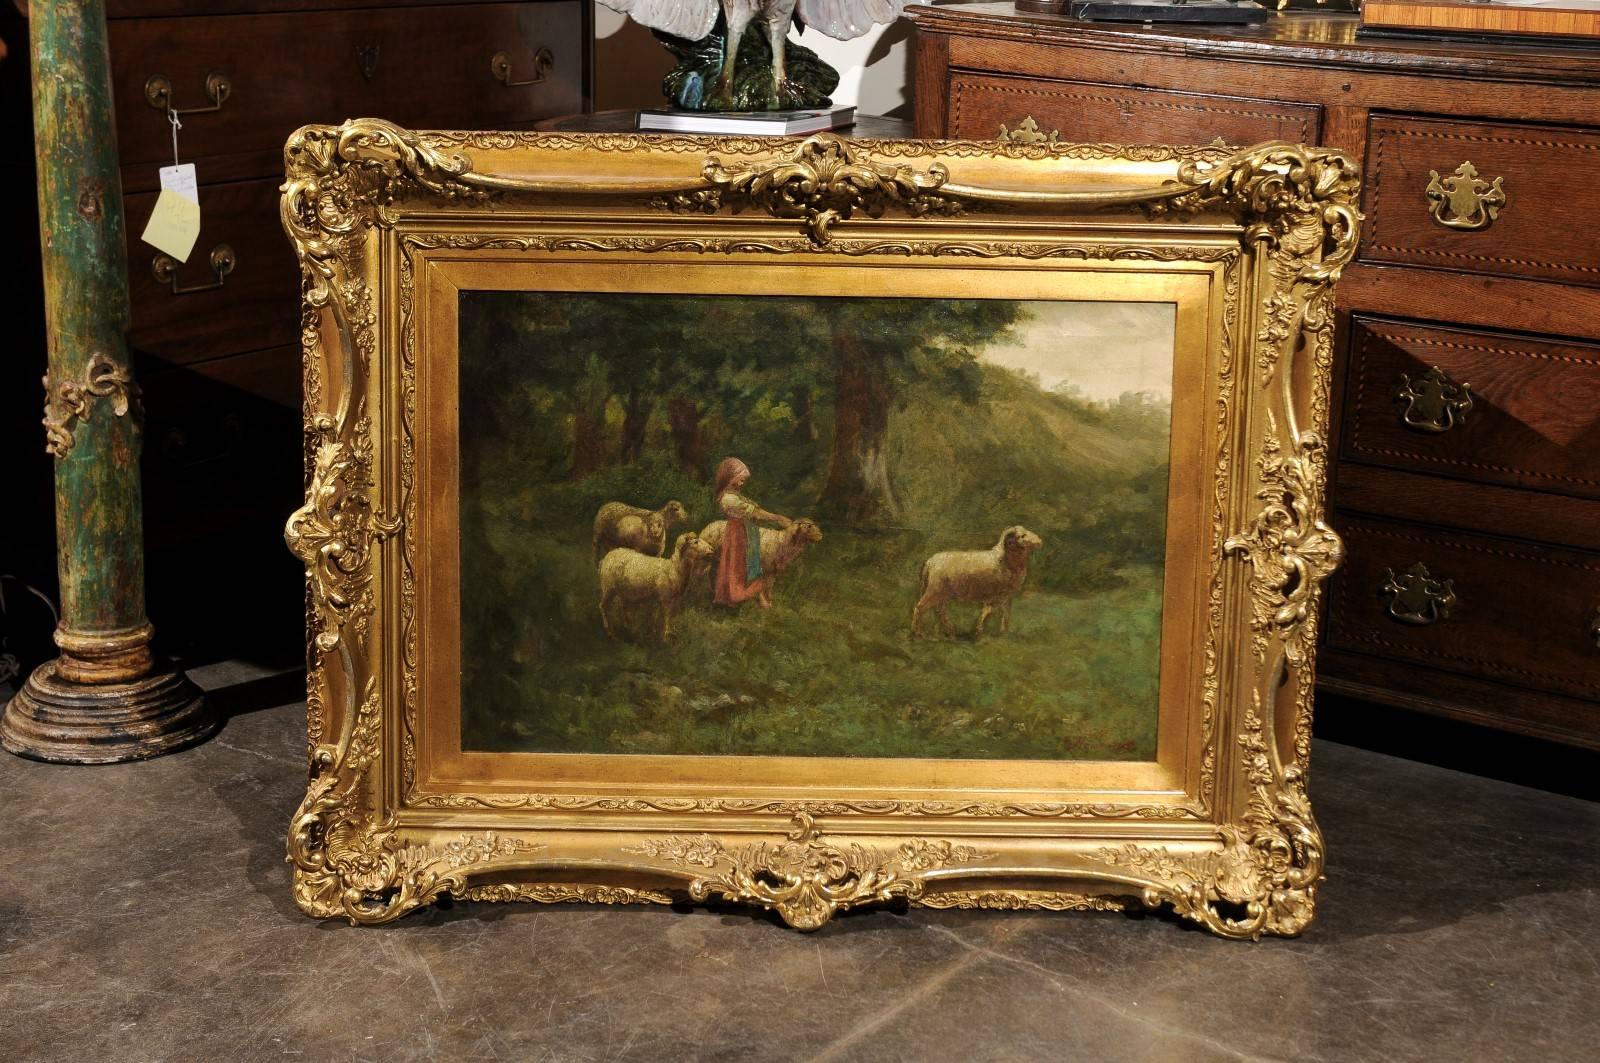 This continental large size turn of the century (19th-20th) oil painting on canvas is set in an antique giltwood frame. The scene is placed in what seems to be the edge of a forest. A lovely shepherdess, dressed in red and blue, is surrounded by